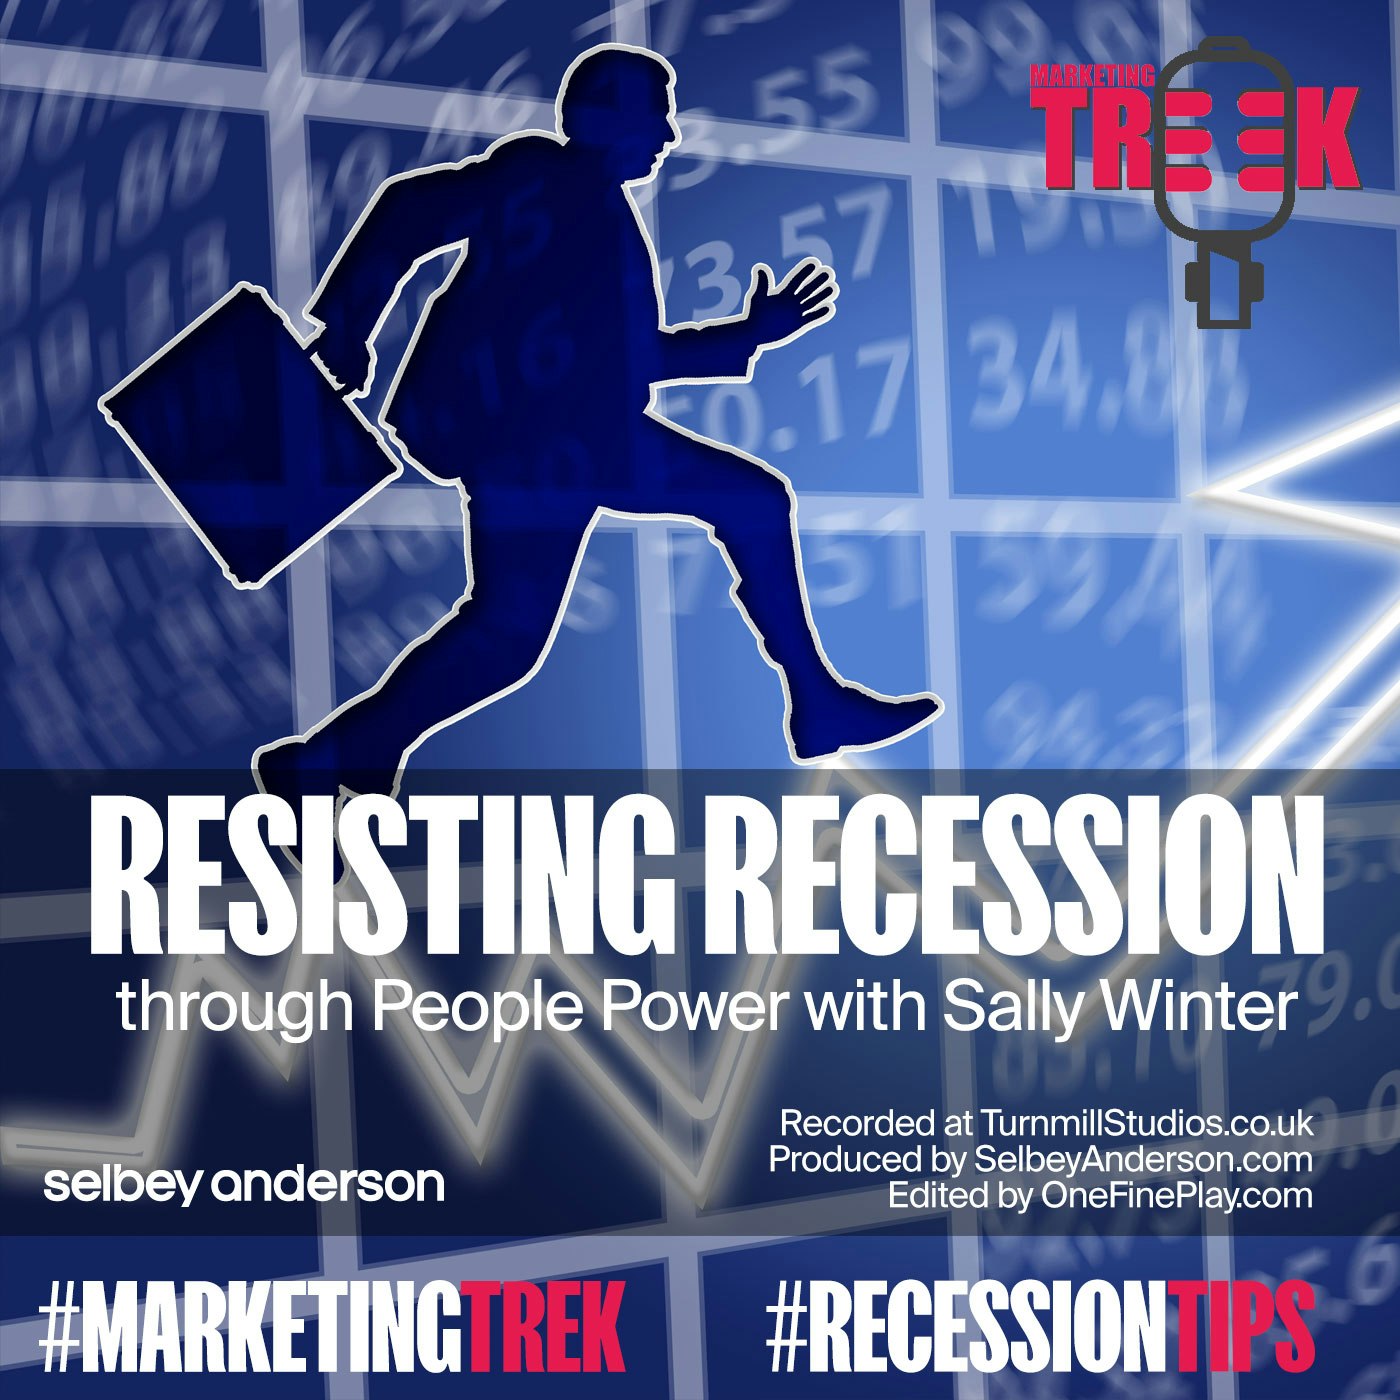 Episode 24: Resist Recession through People Power with Sally Winter